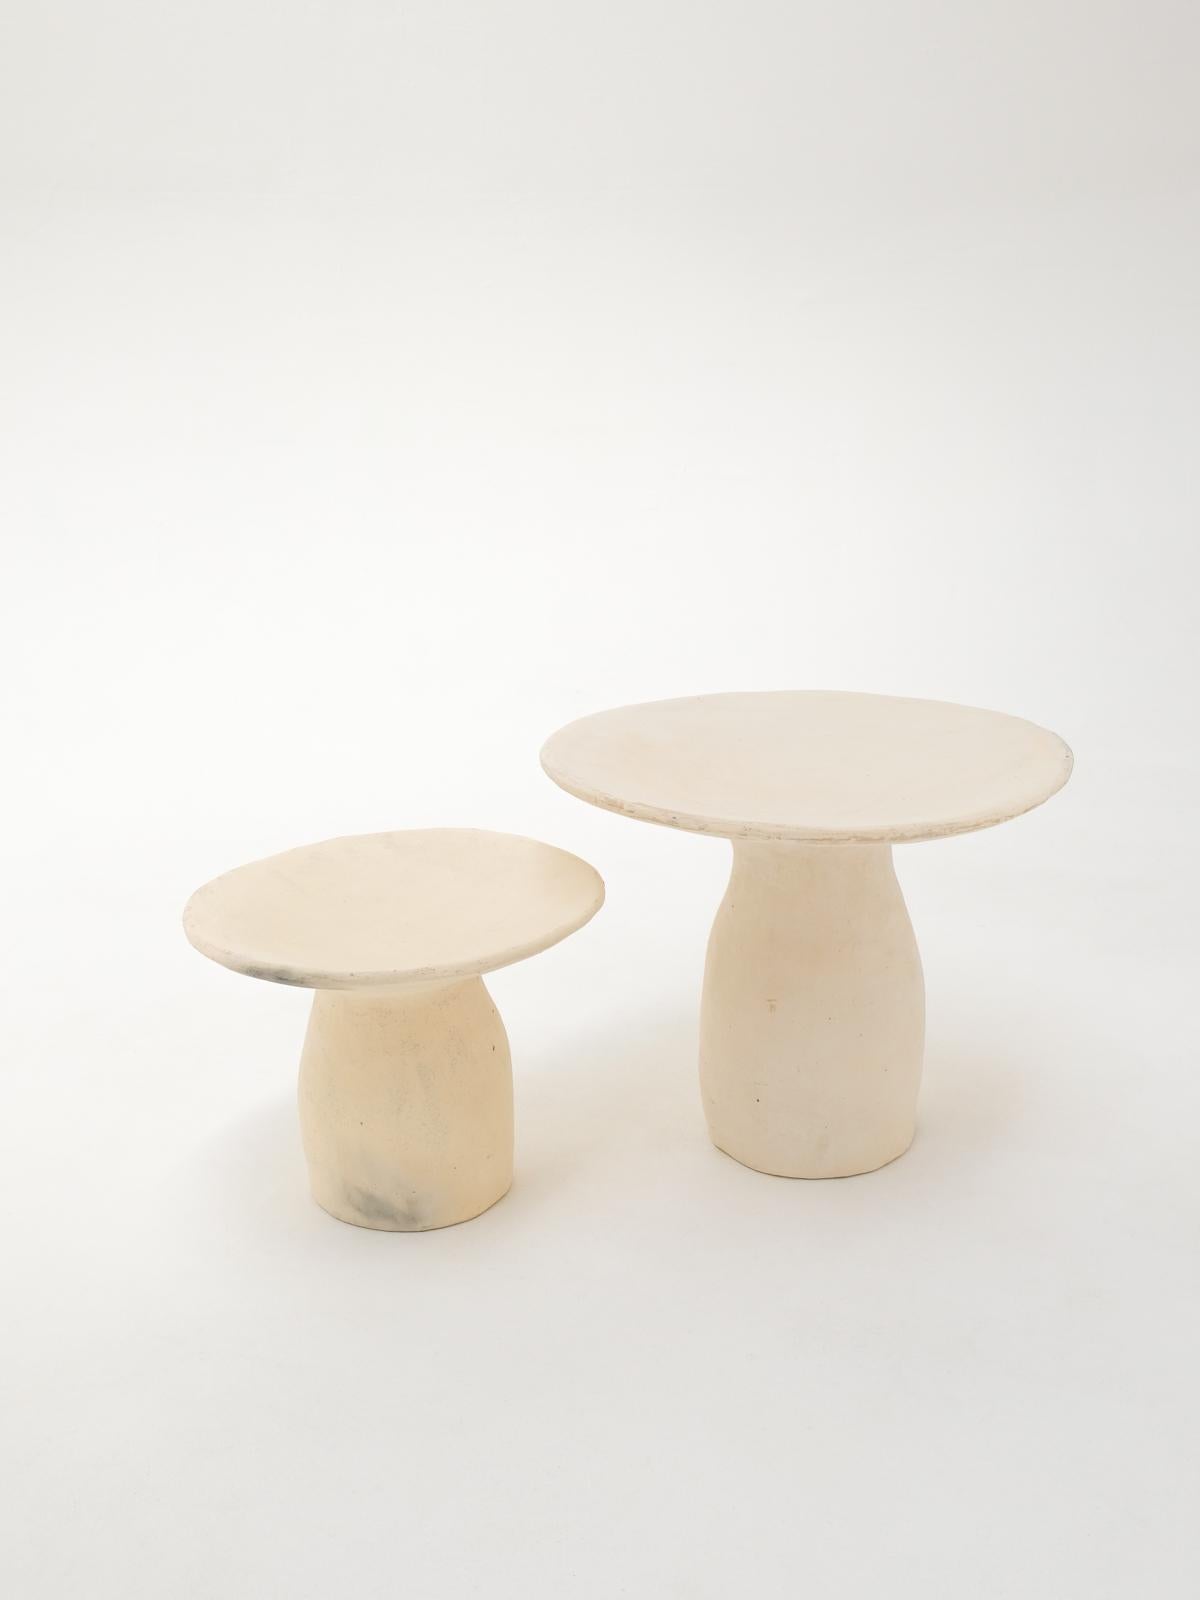 Moroccan White Big Side Table Made of local Clay, natural pigments, Handcrafted For Sale